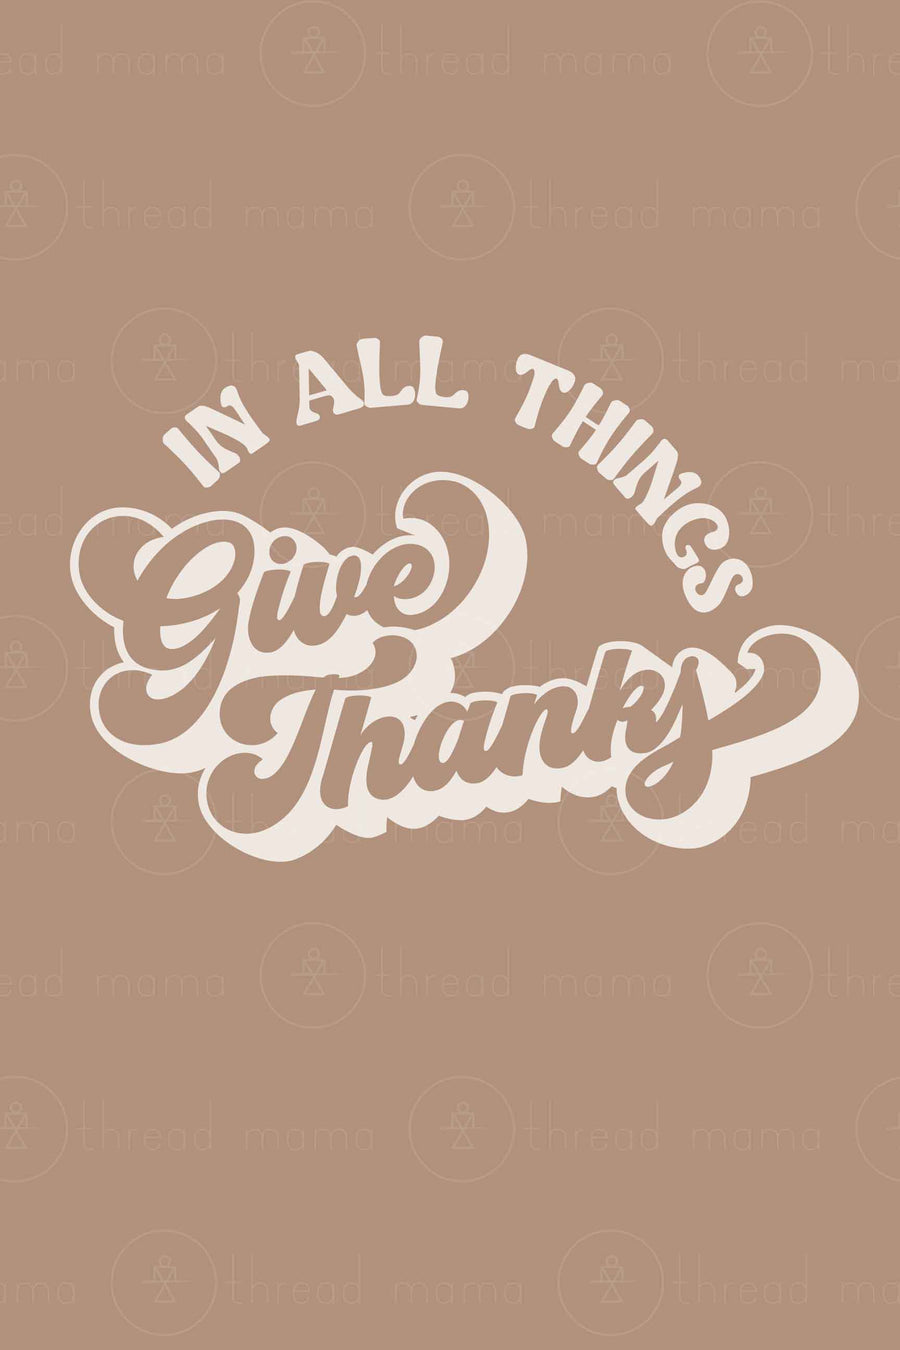 In All Things Give Thanks (Option 1)